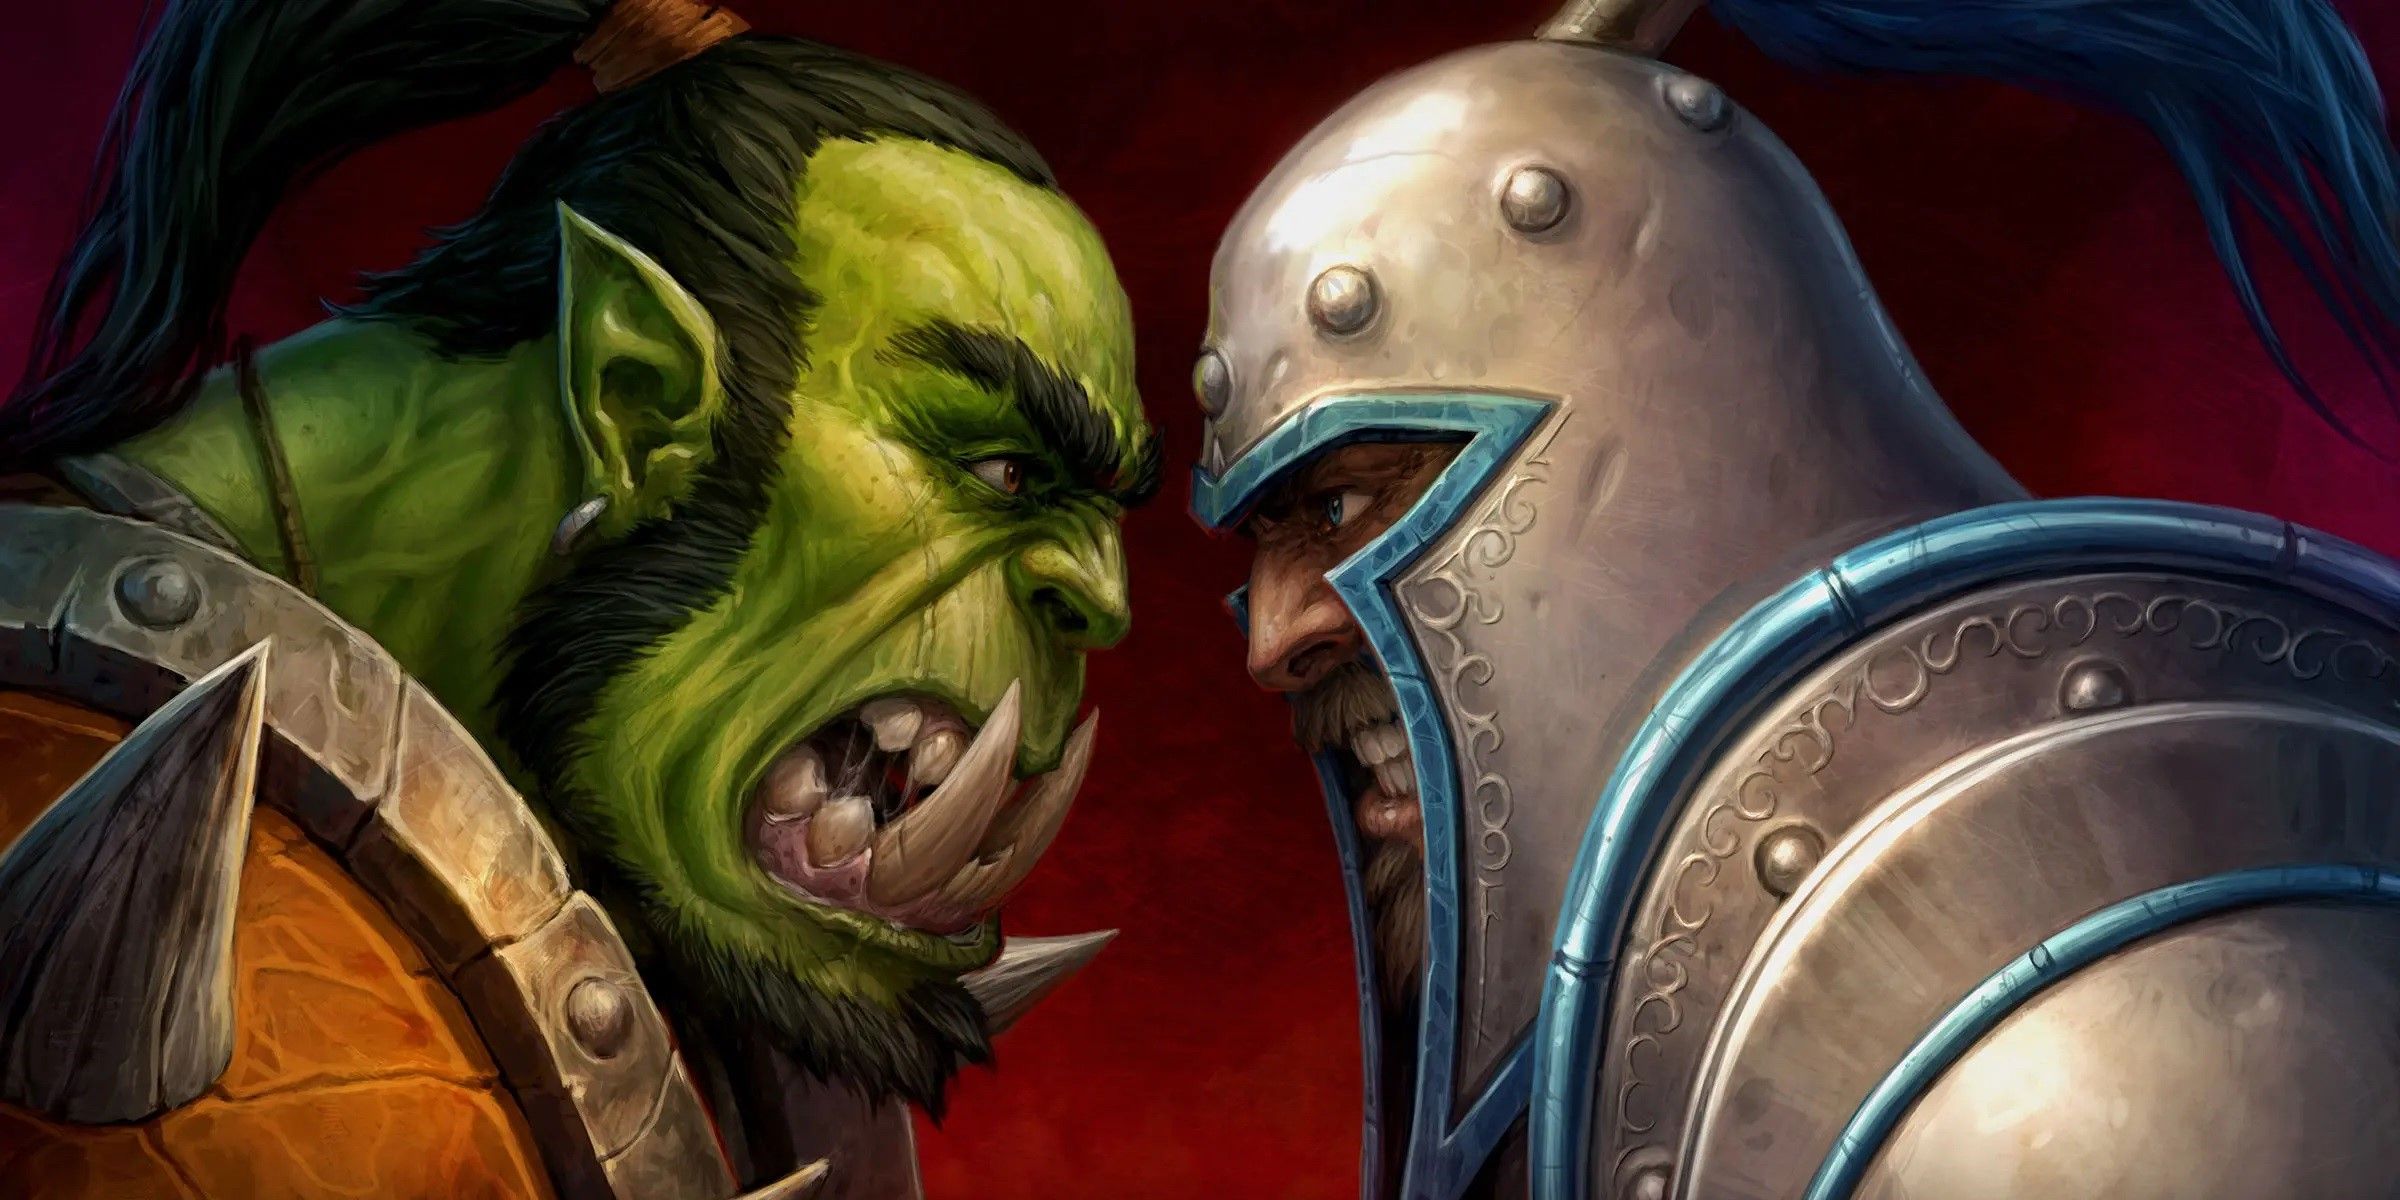 An Orc from World of Warcraft Looking Angrily At A Human